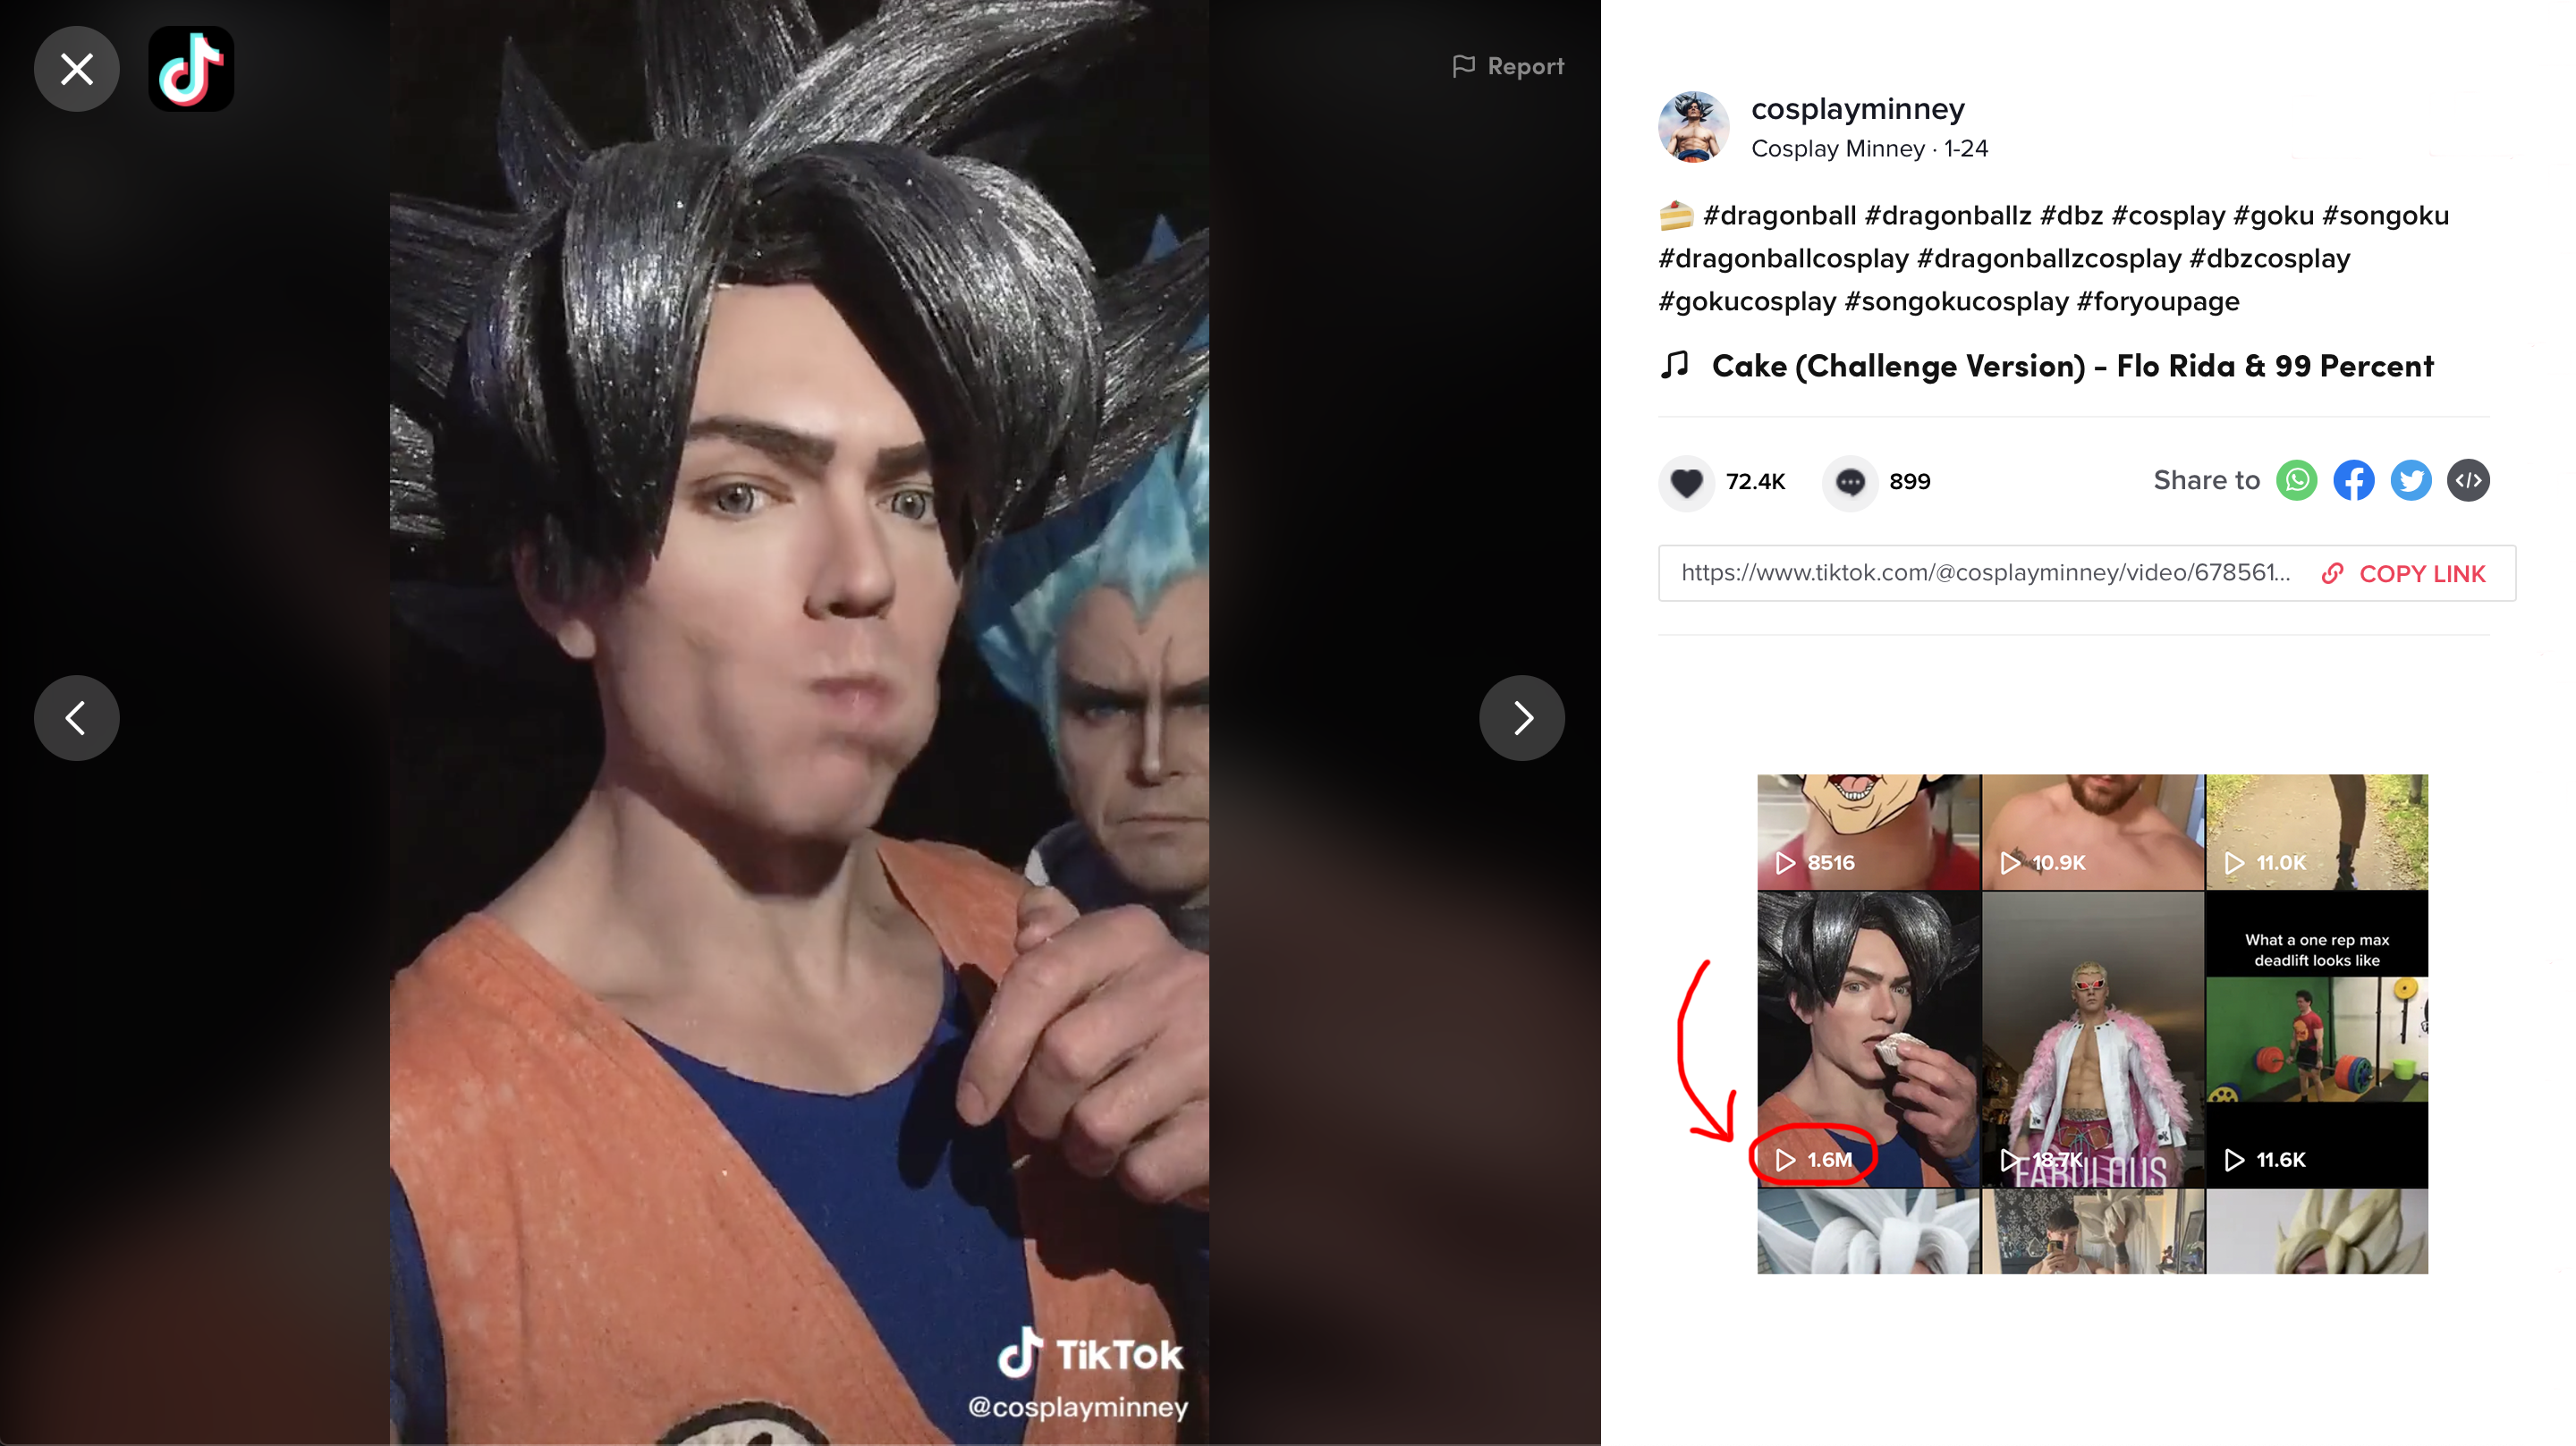 Why Tiktok has crazy reach for cosplayers and personal brands - Tiktok Goku gives his two cents